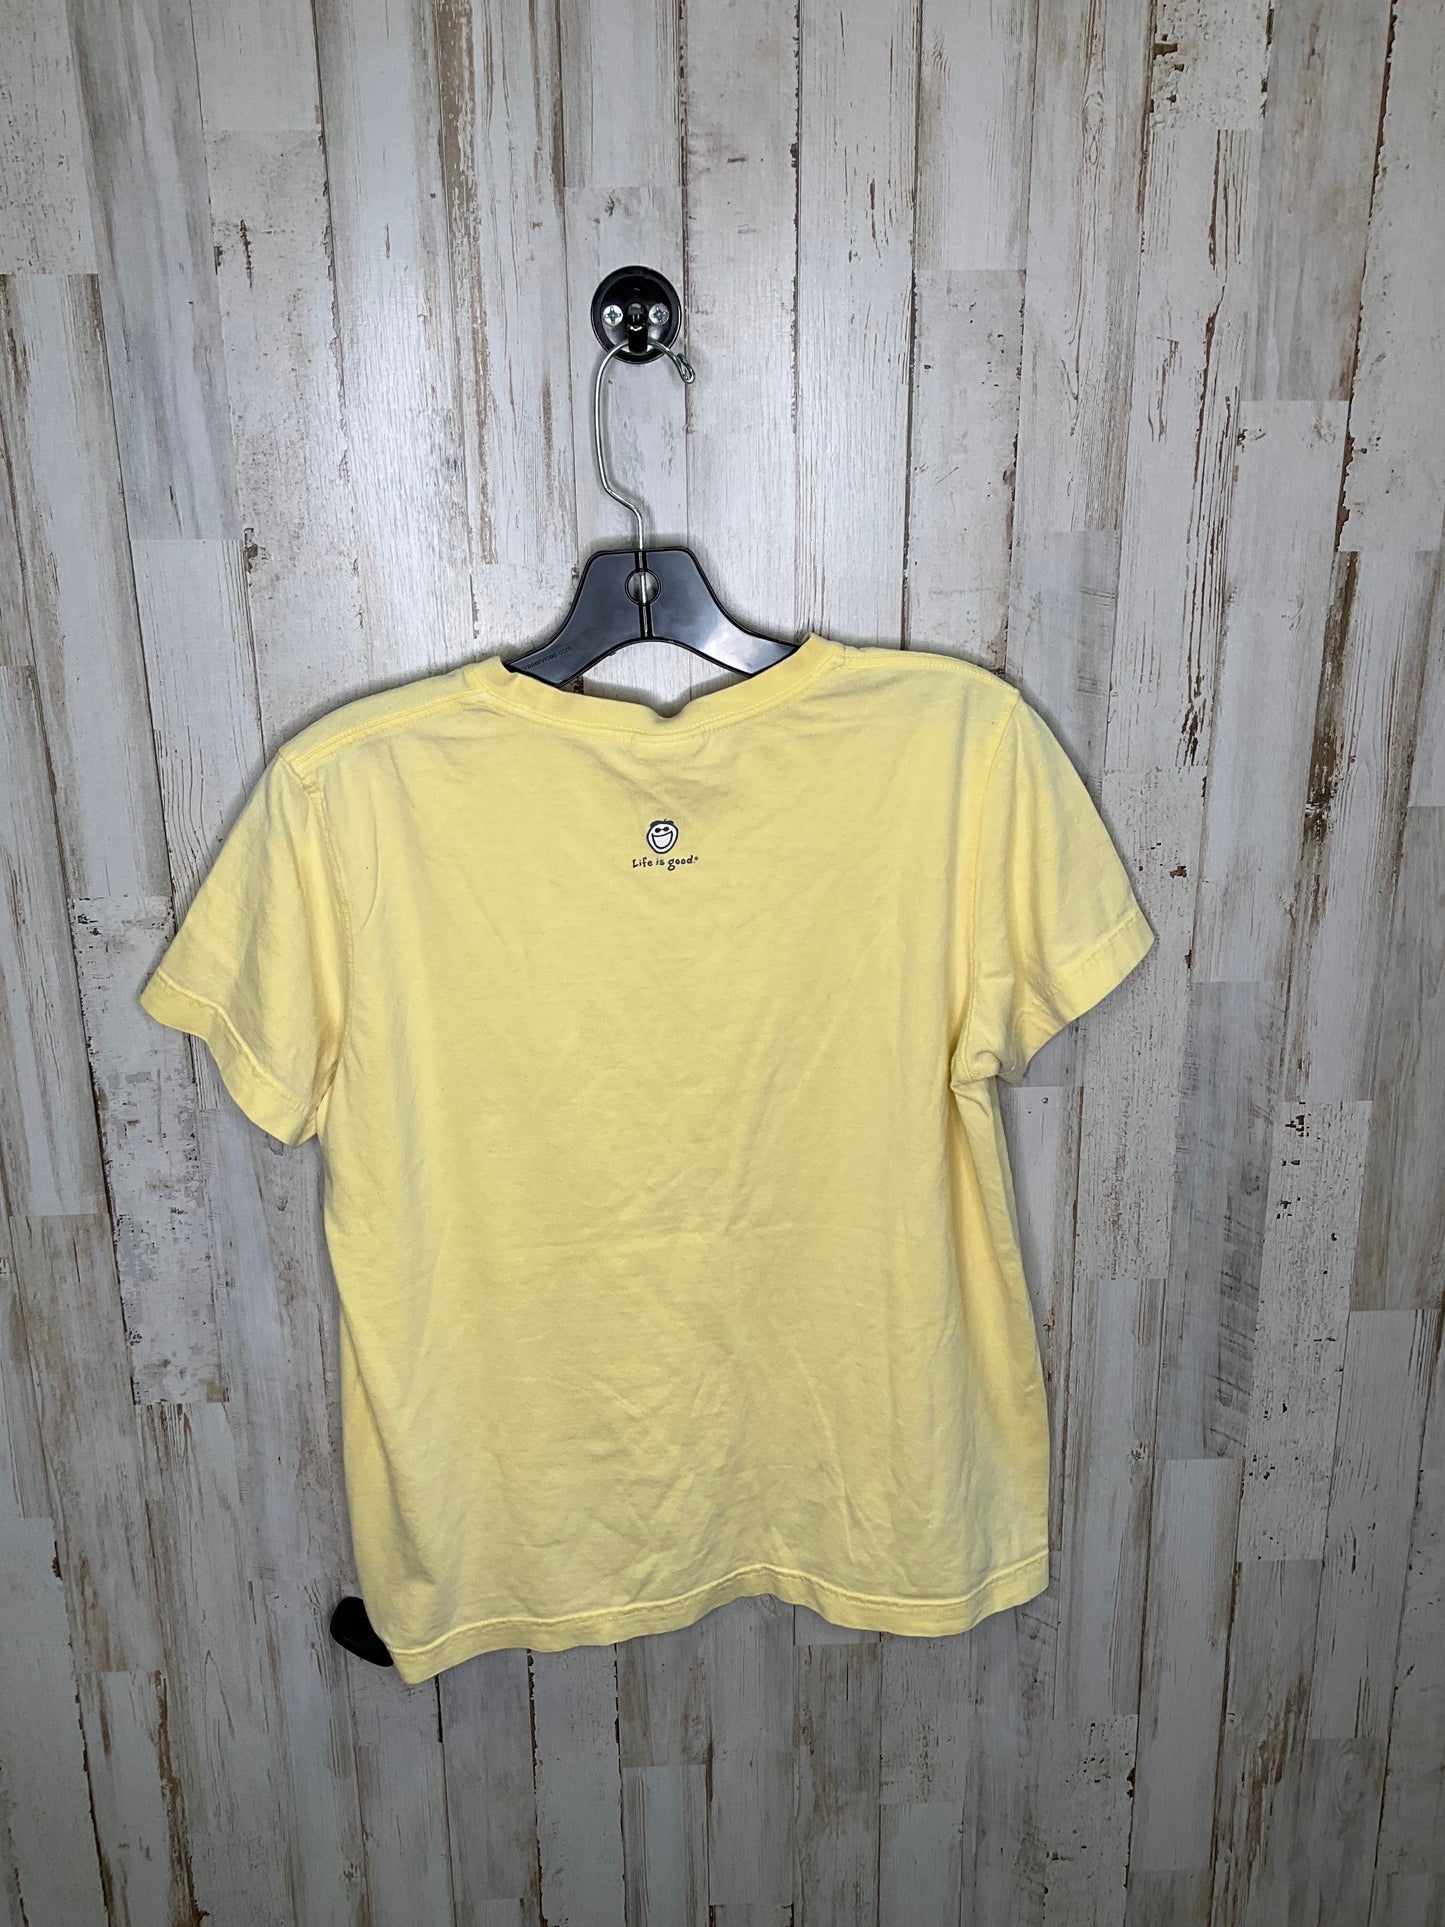 Yellow Top Short Sleeve Life Is Good, Size S